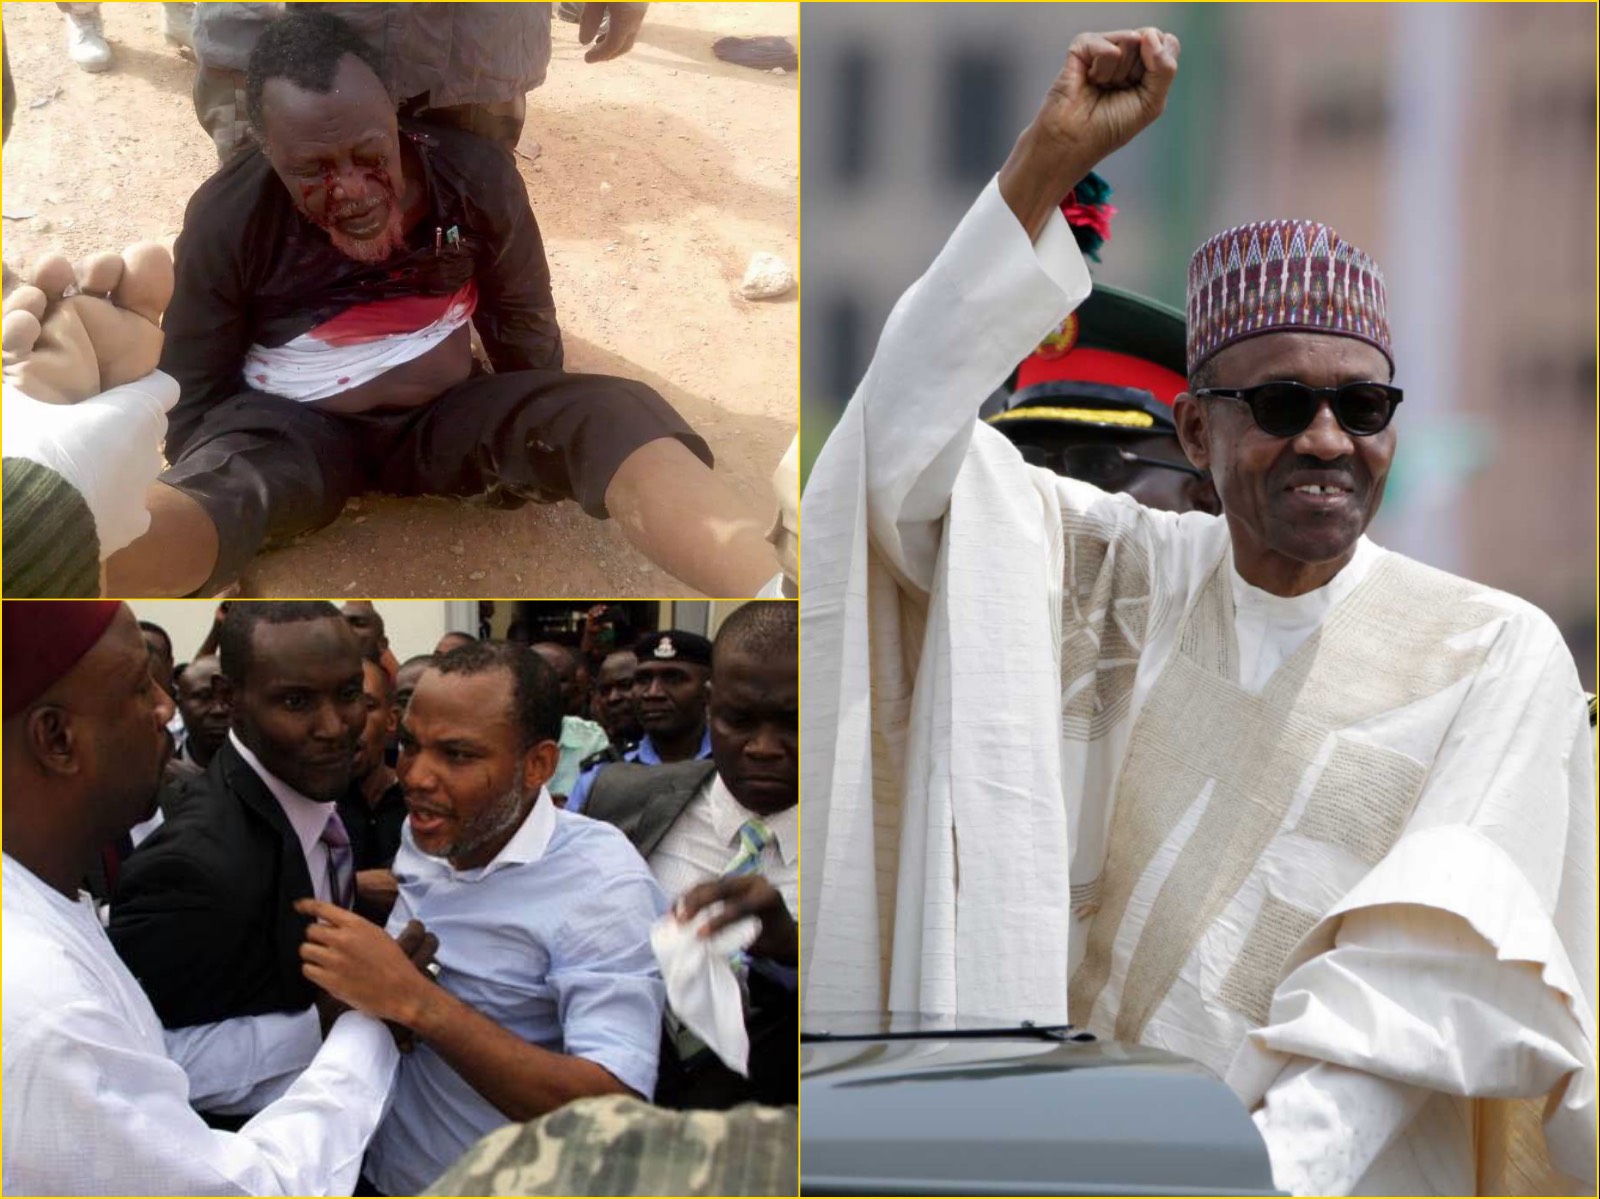 Clockwise from Top Left: Shiehk Ibrahim Zakzaky, Shi'ite Sect Leader in Zaria who was shot 6 times by Nigerian soldiers and detained without trial by the government for 200 days; President Muhammadu Buhari pictured as his inauguration on May 29, 2015; and Nnamdi Kanu, pro-Biafra activist detained by the secret police since October 2015 over 4 court orders for his bail has been disobeyed by the Buhari government Ibrahim El Zakzaky, El-Zakzaky, Zaria, Shi'ites, Shia